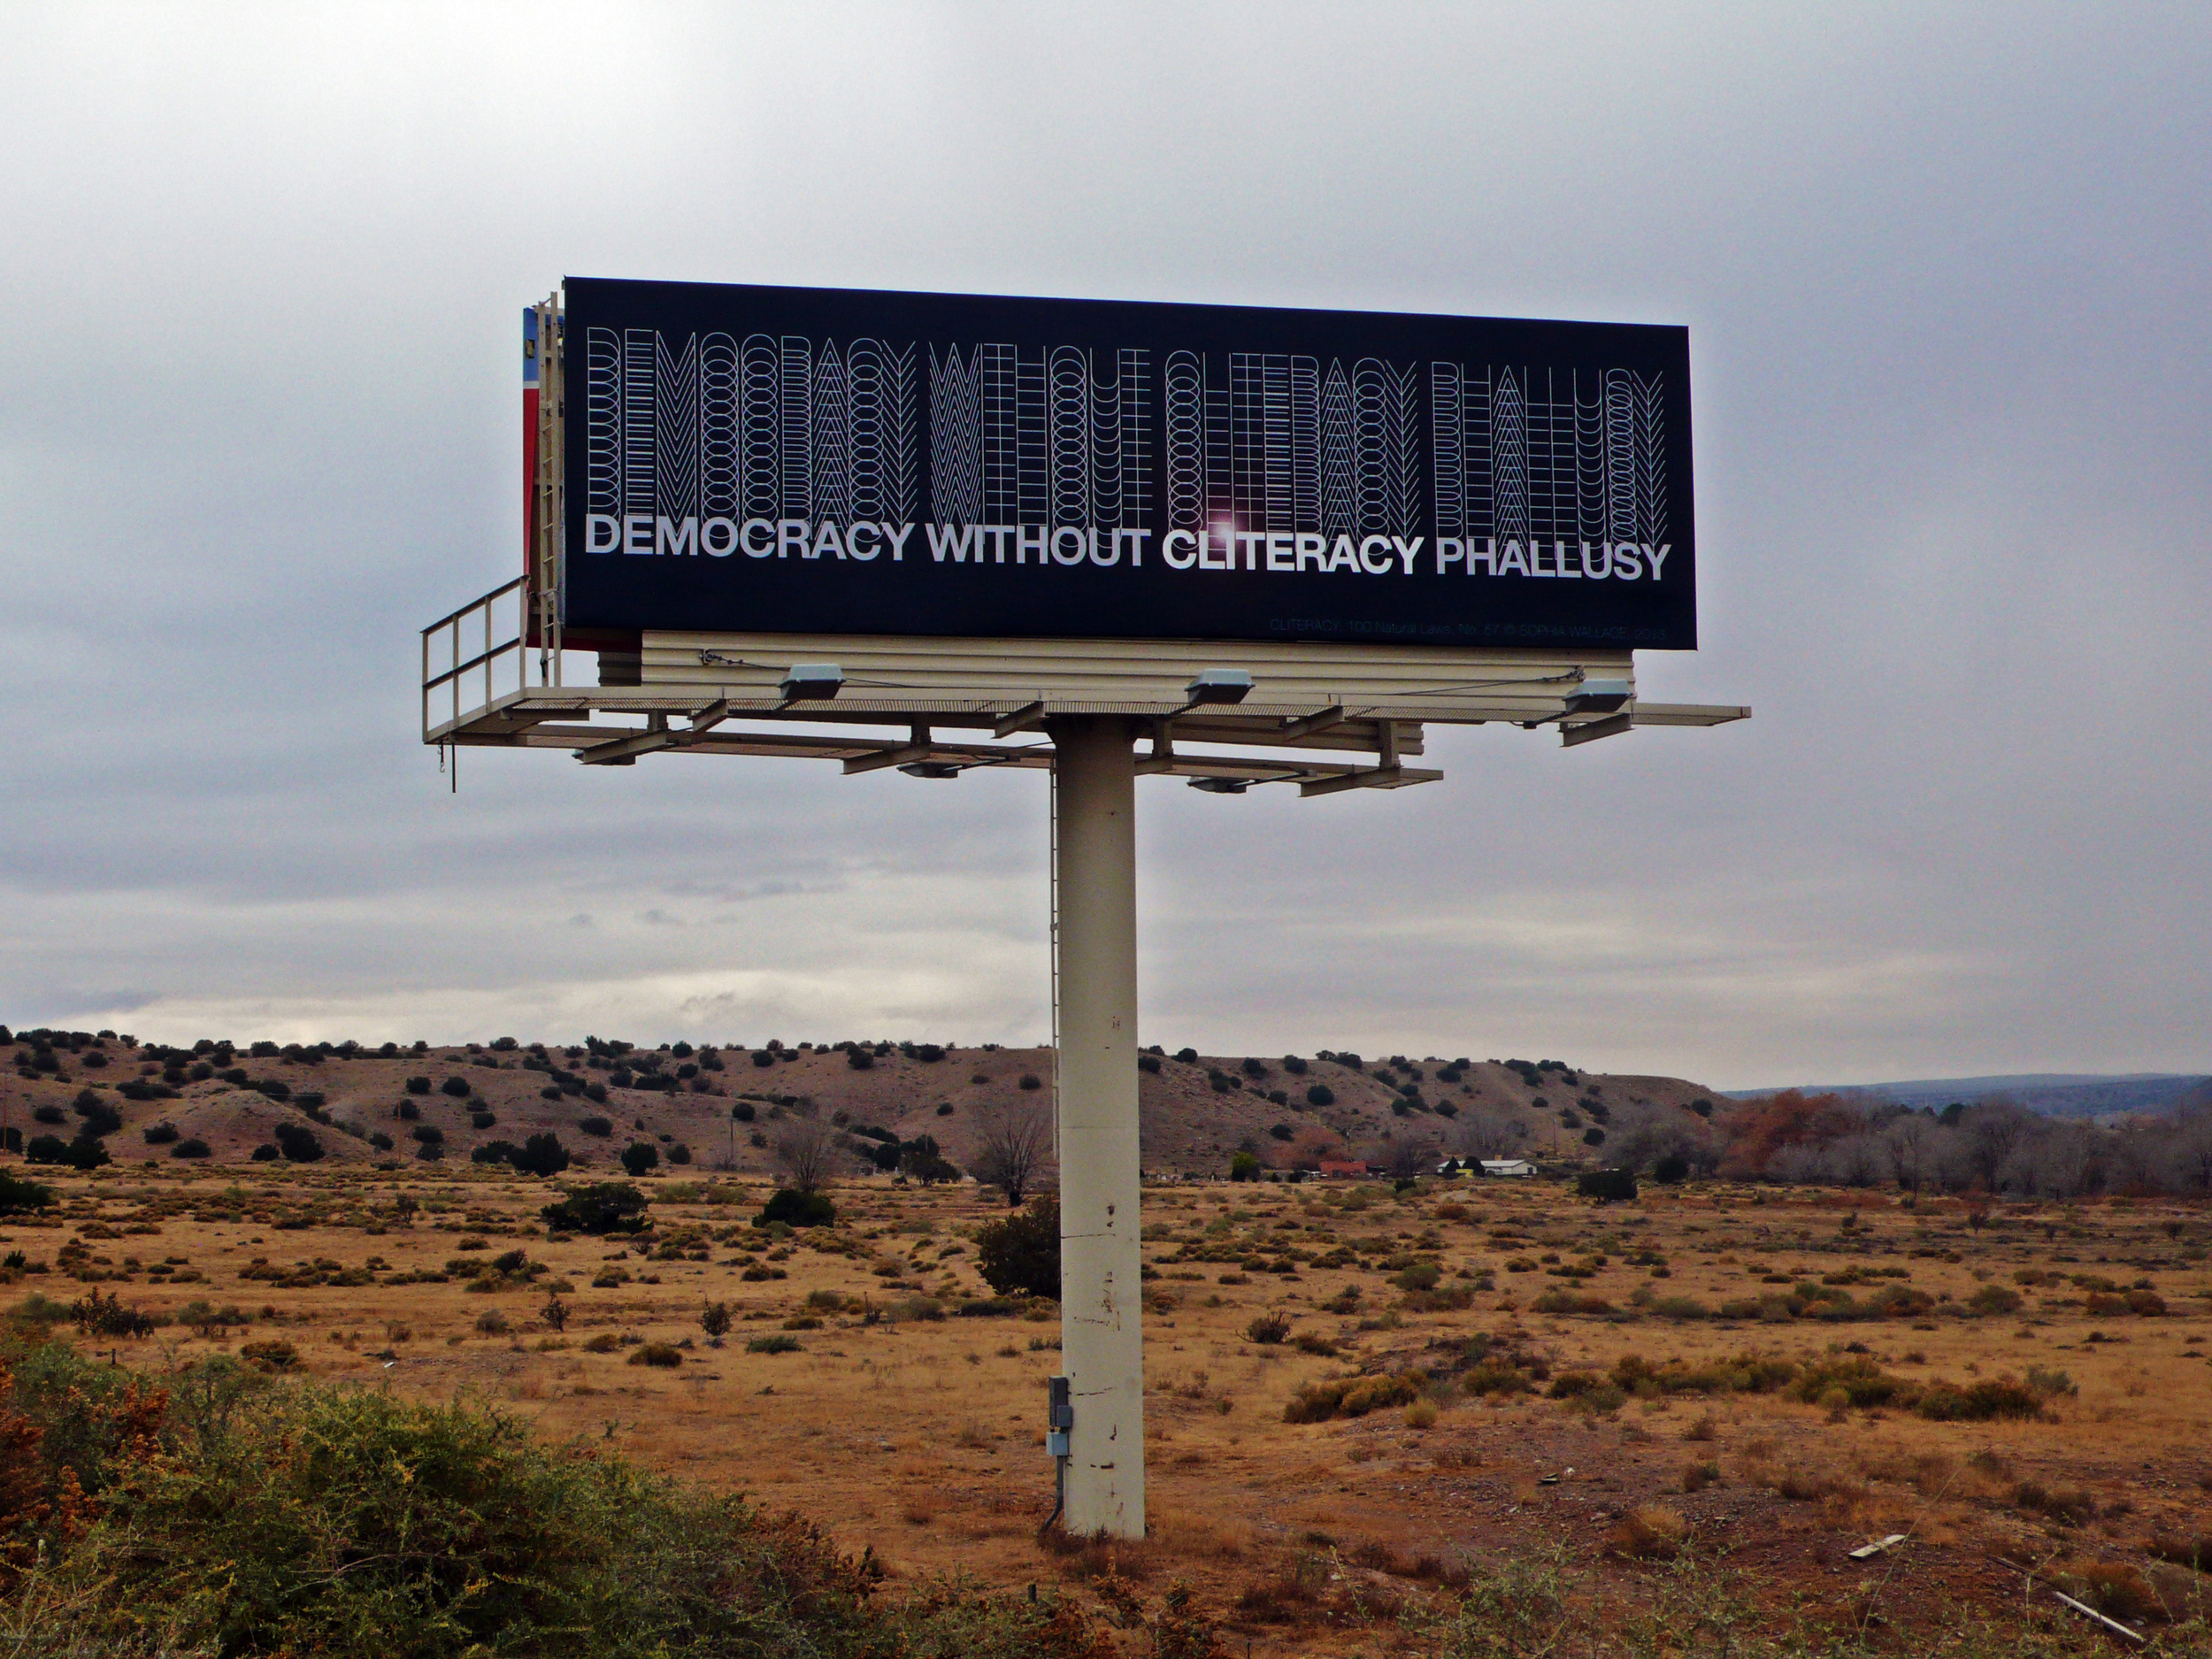   DEMOCRACY WITHOUT CLITERACY PHALLUSY,  Natural Law No. 57, 2013  Vinyl, Billboard 35 x 10.6 feet Exhibition on view November 11-25, 2013 on I-25 Southbound near mile marker 247.2. 